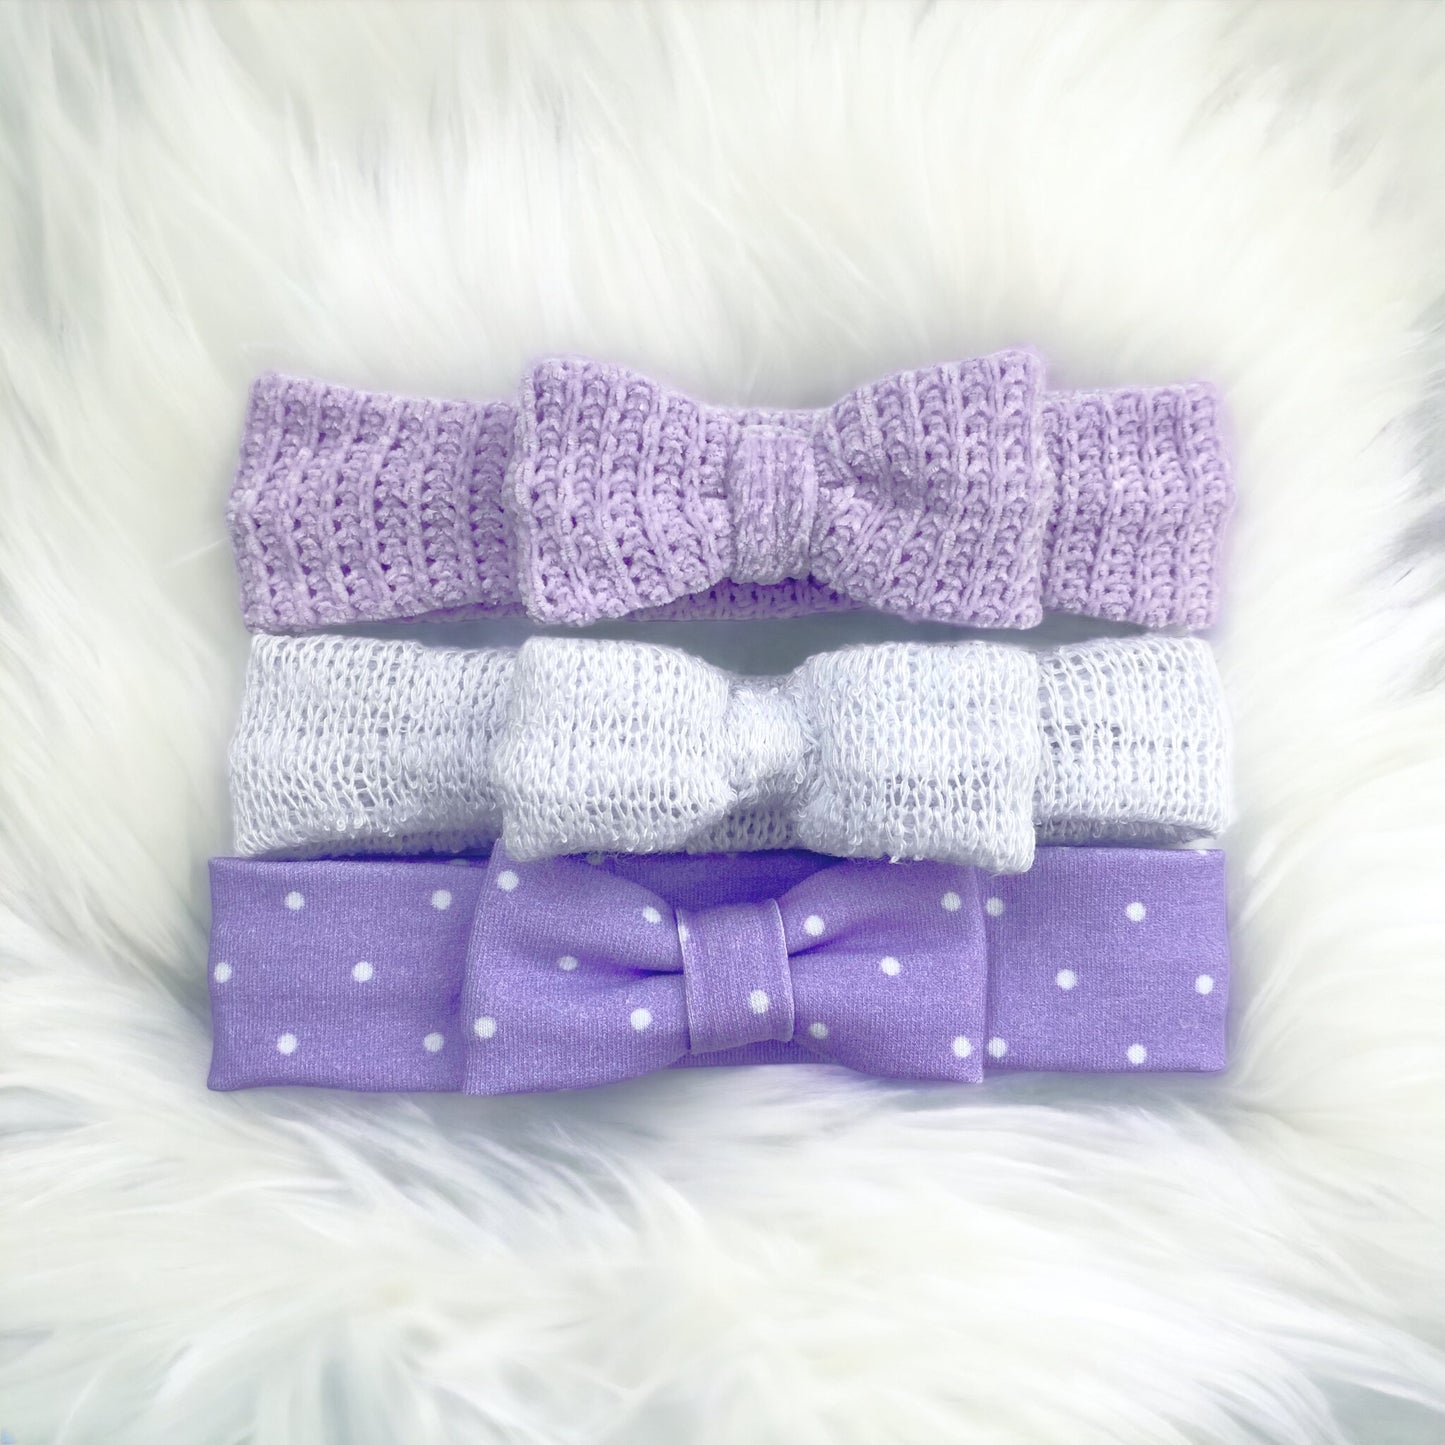 how to sew a baby headband bow with a pdf sewing pattern, preemies, newborn, toddler girls, adults, easy beginners sewing project, gifts to sew for teens